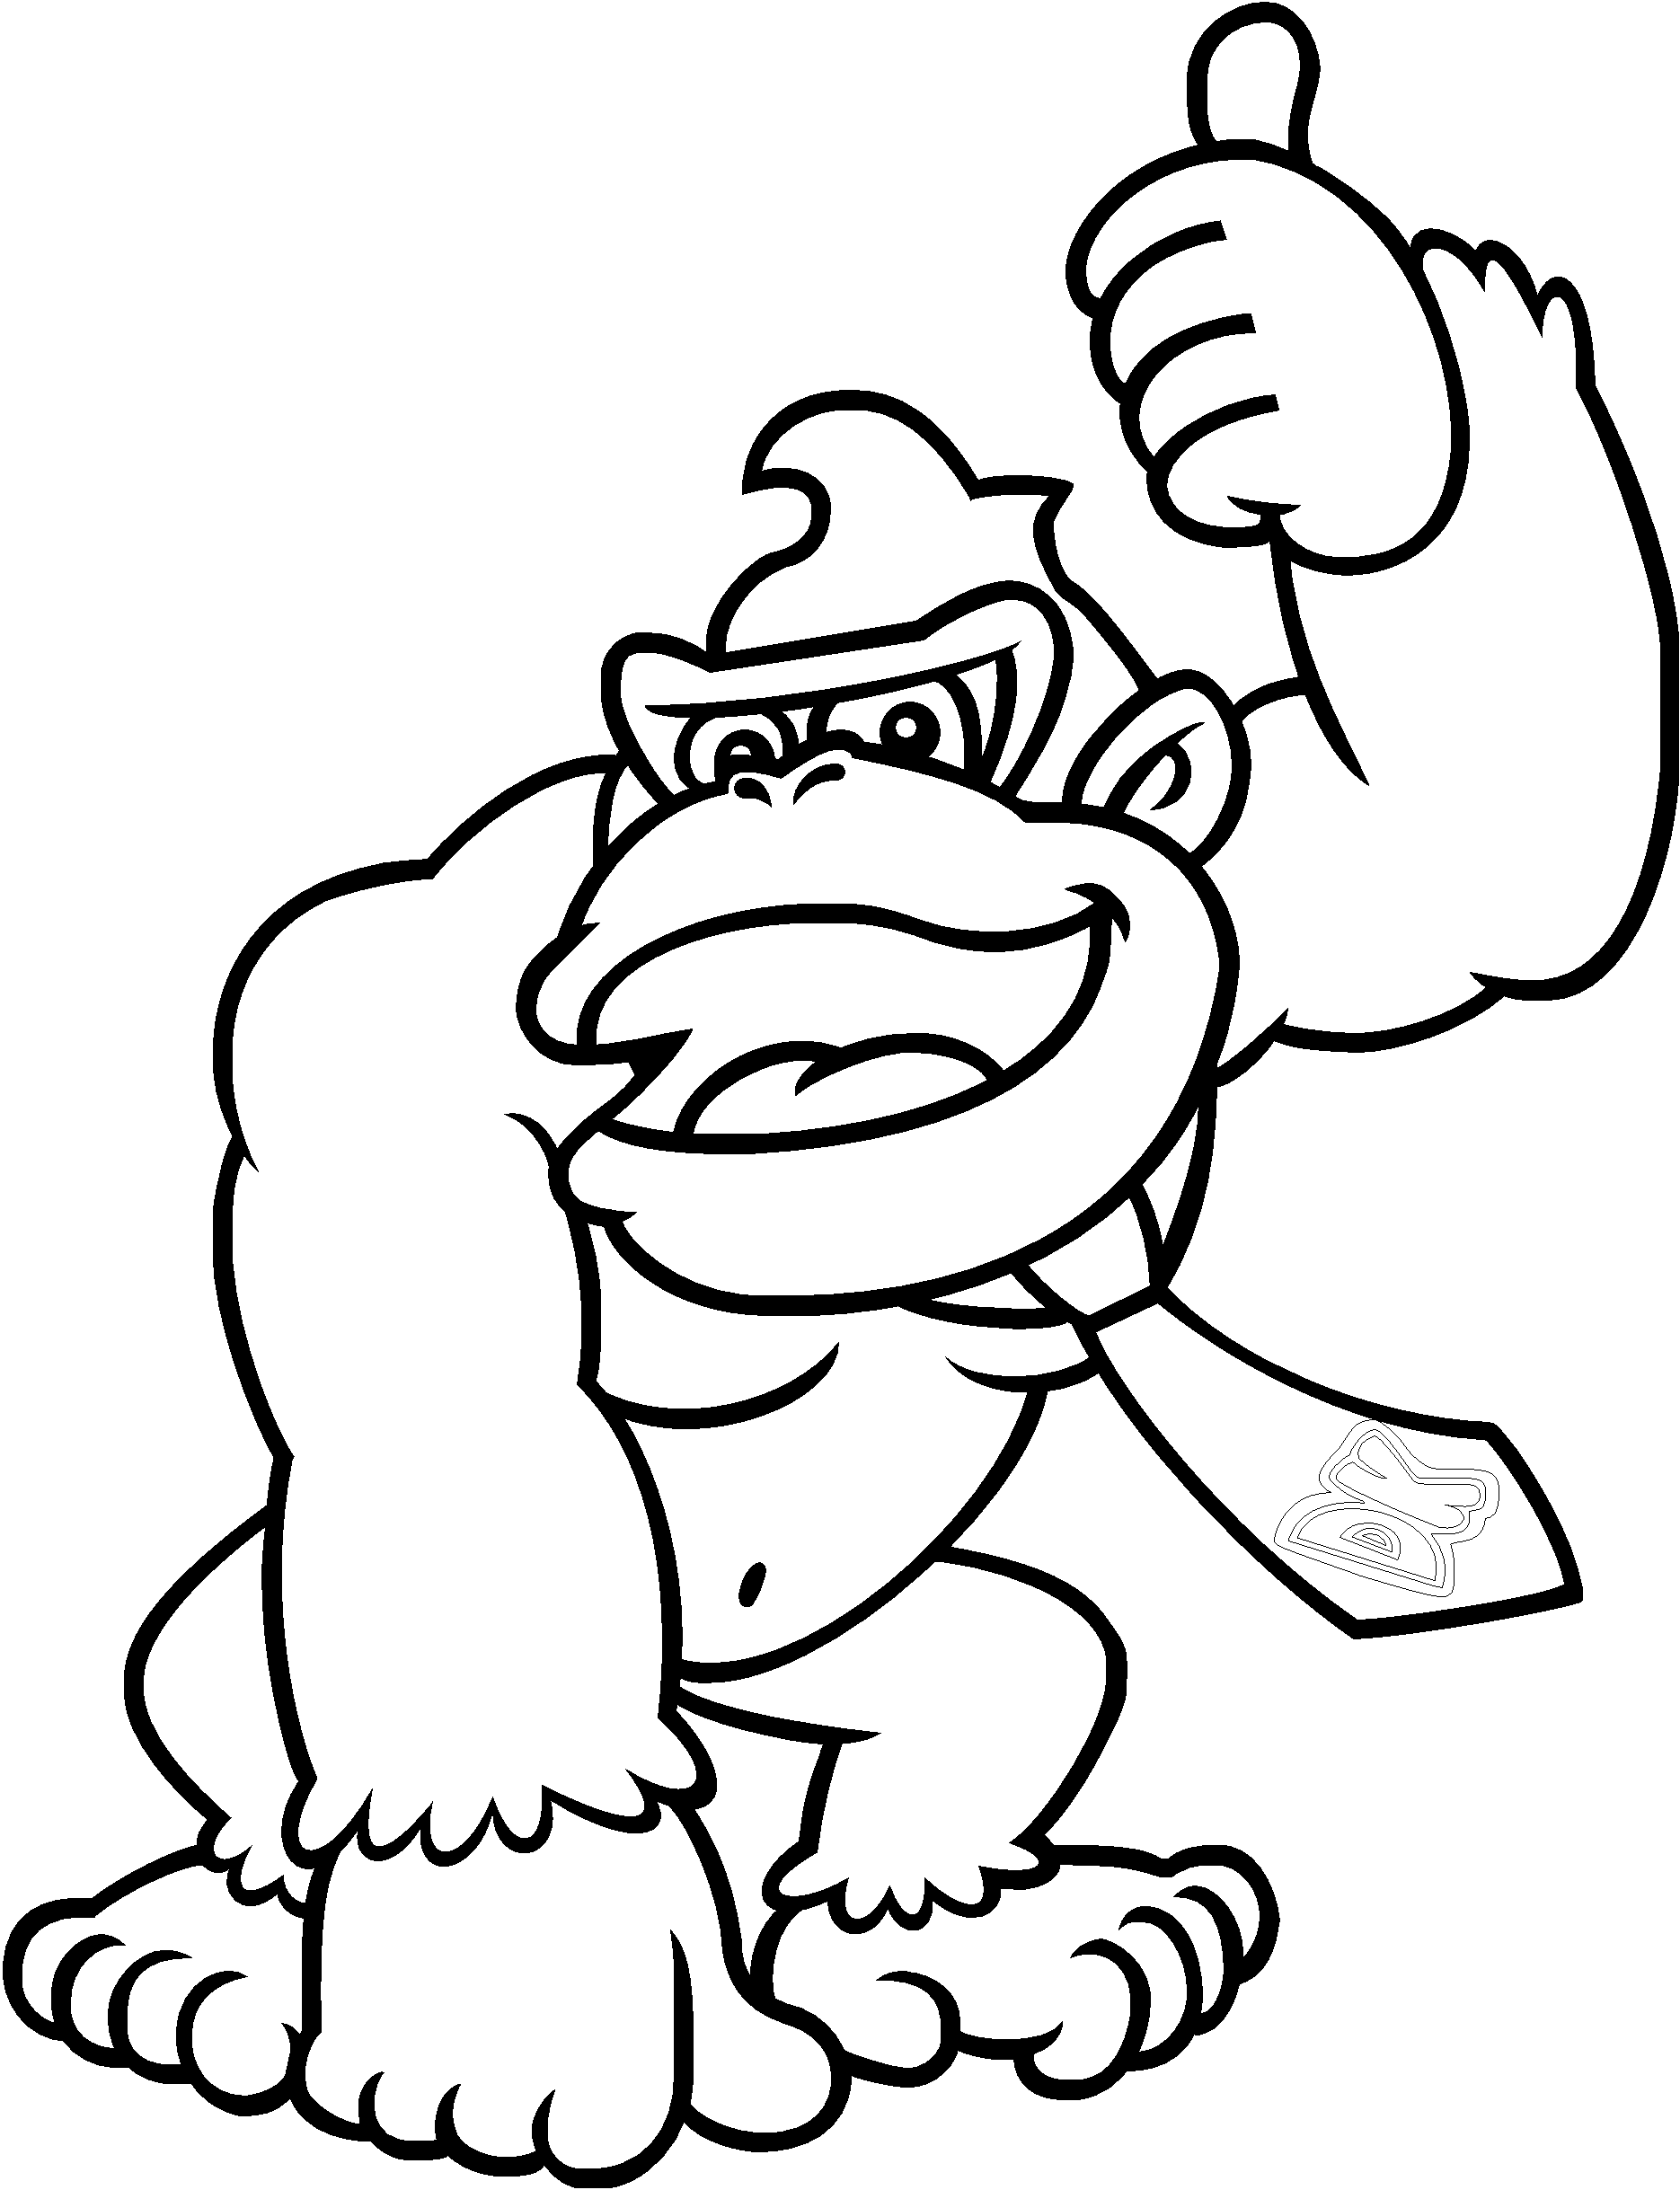 Donkey Kong Coloring Pictures | Coloring Pages for Kids and for Adults